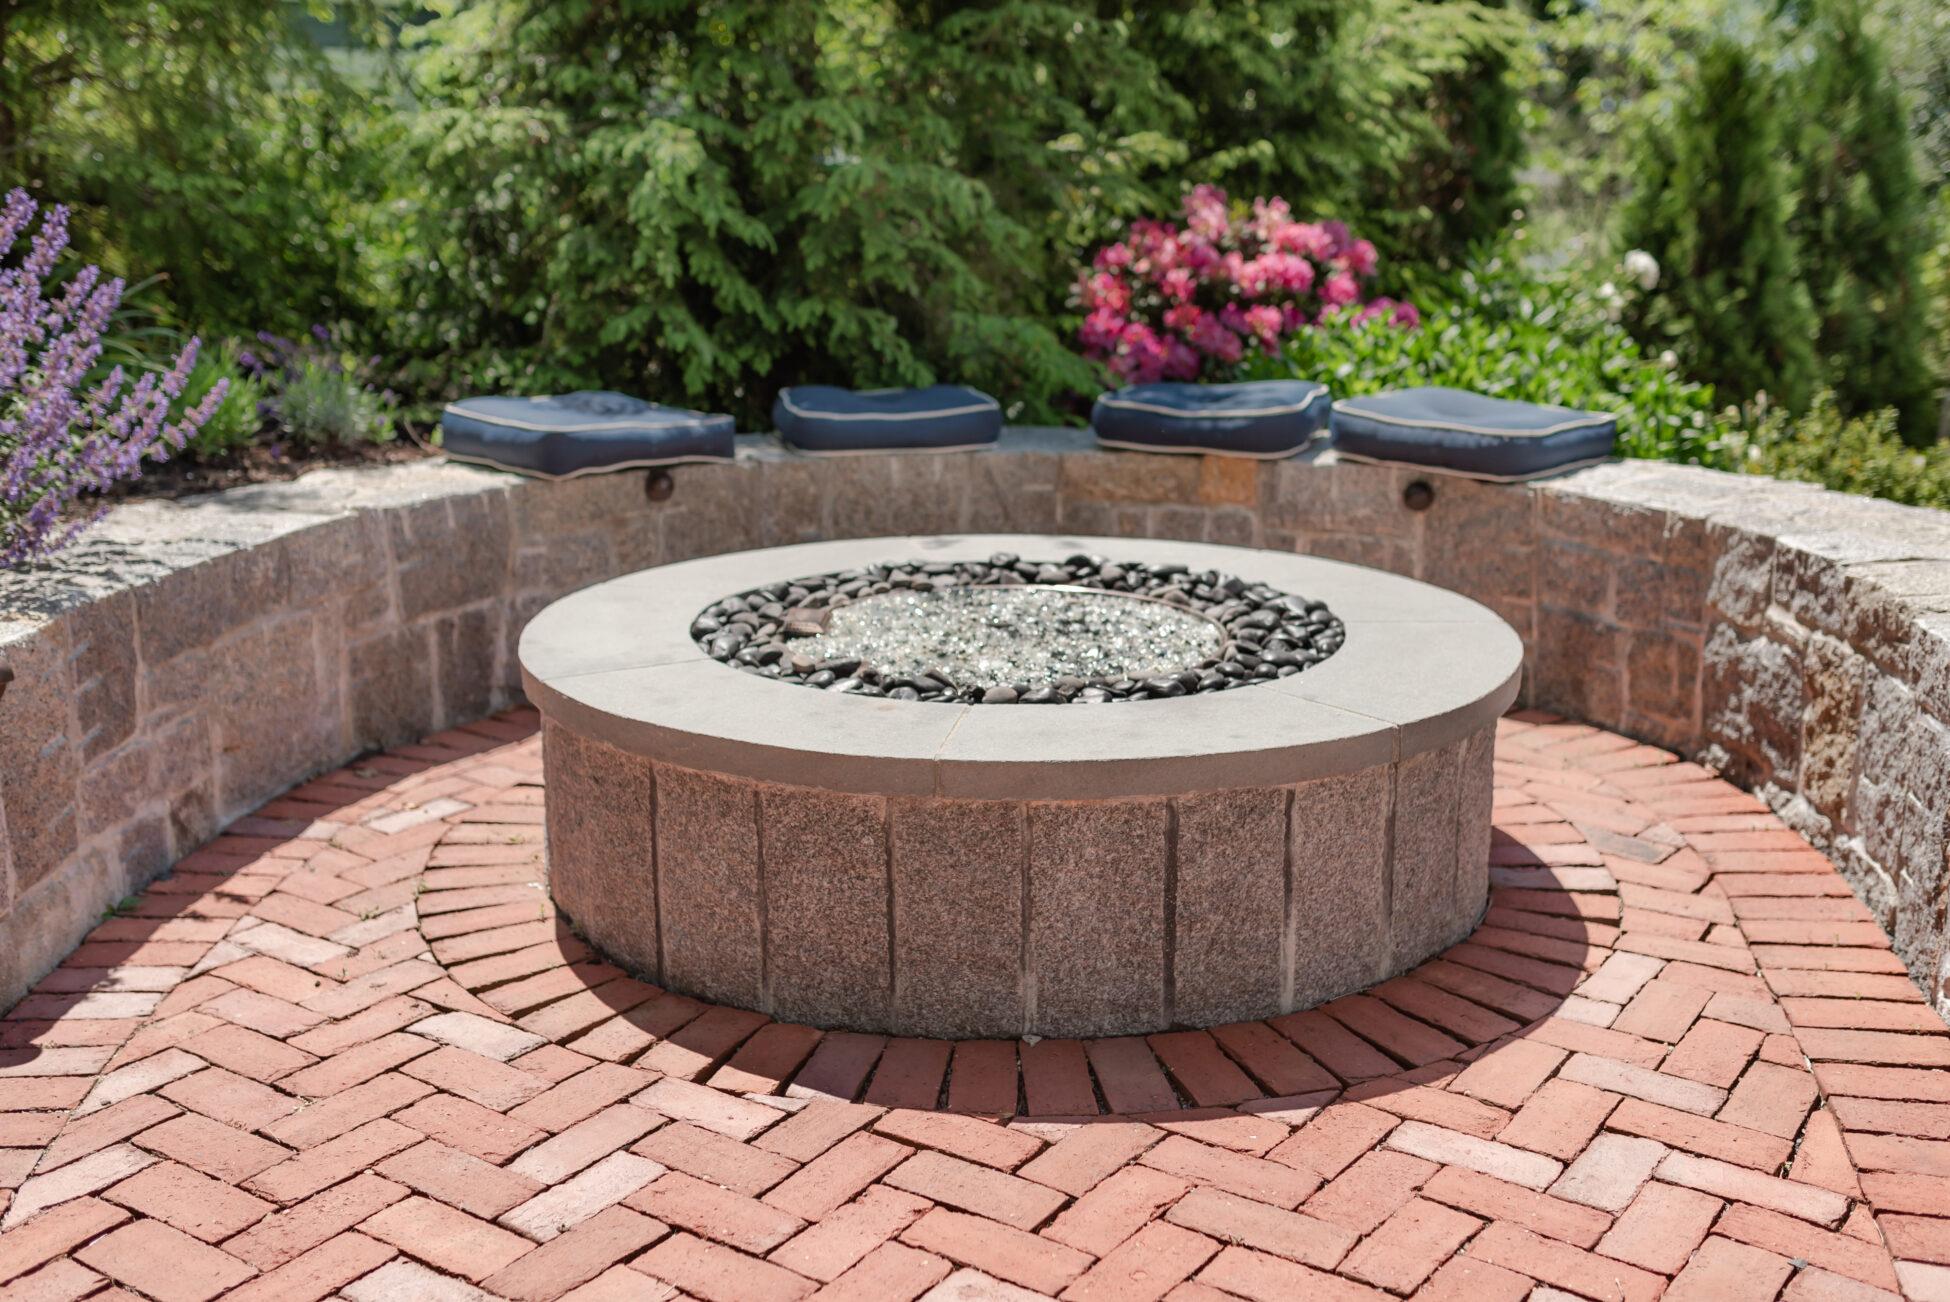 Paved patio with stone firepit